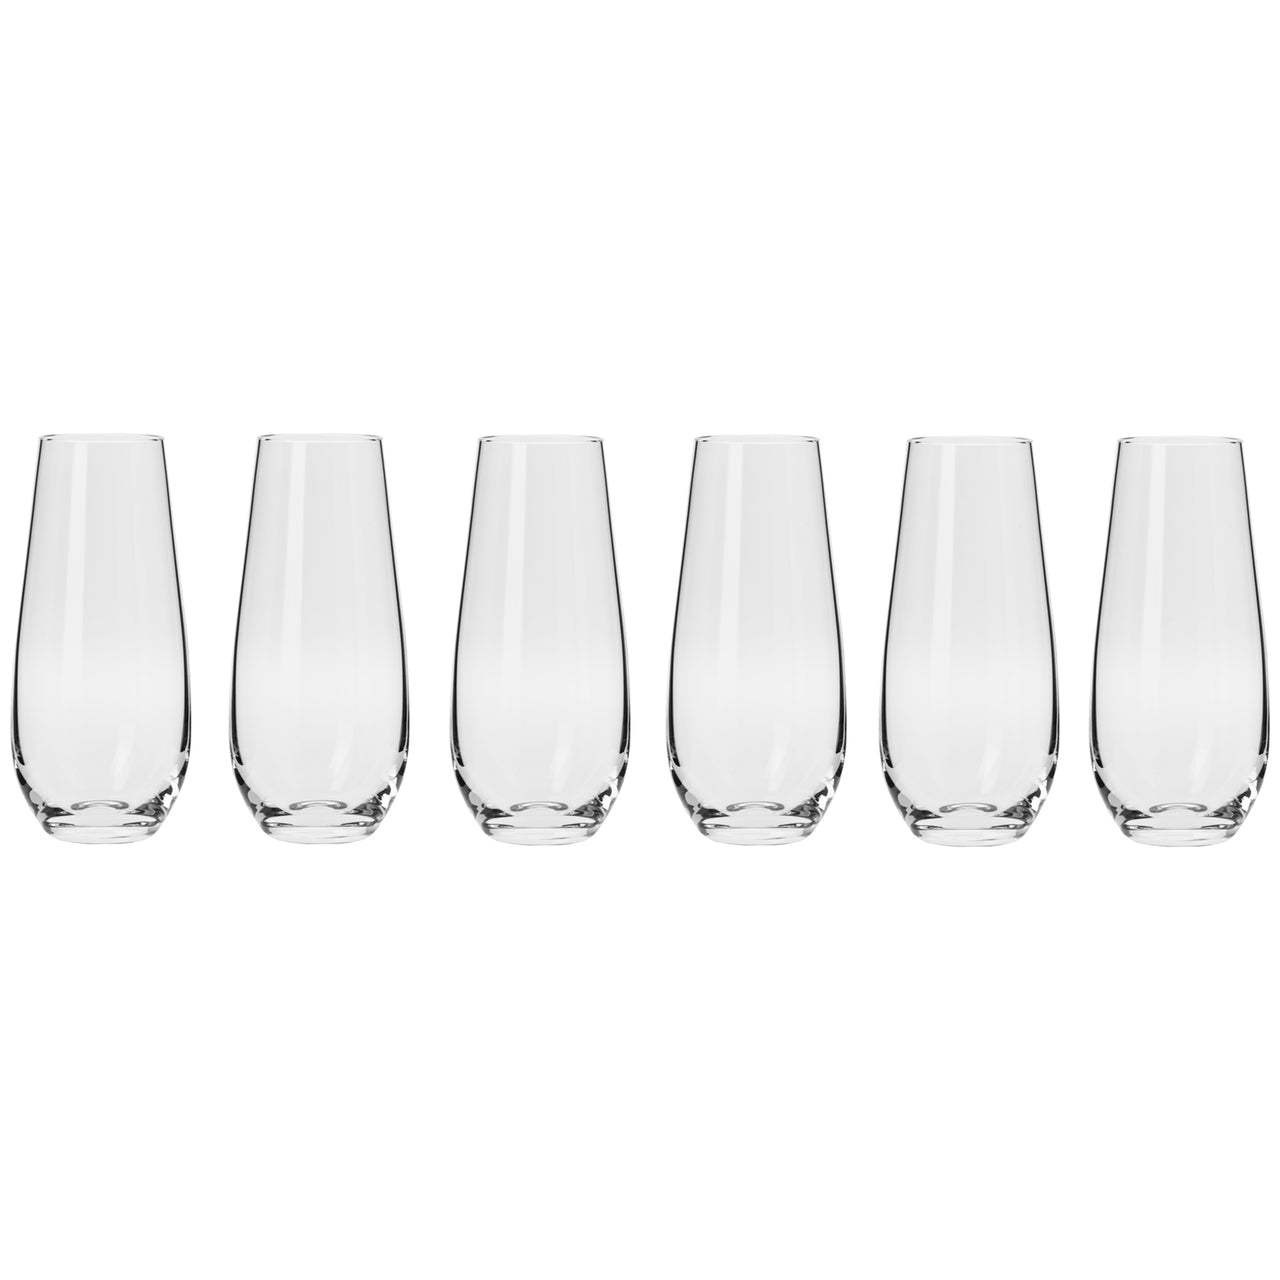 Harmony 230ml Stemless Champagne Flutes (Set of 6)